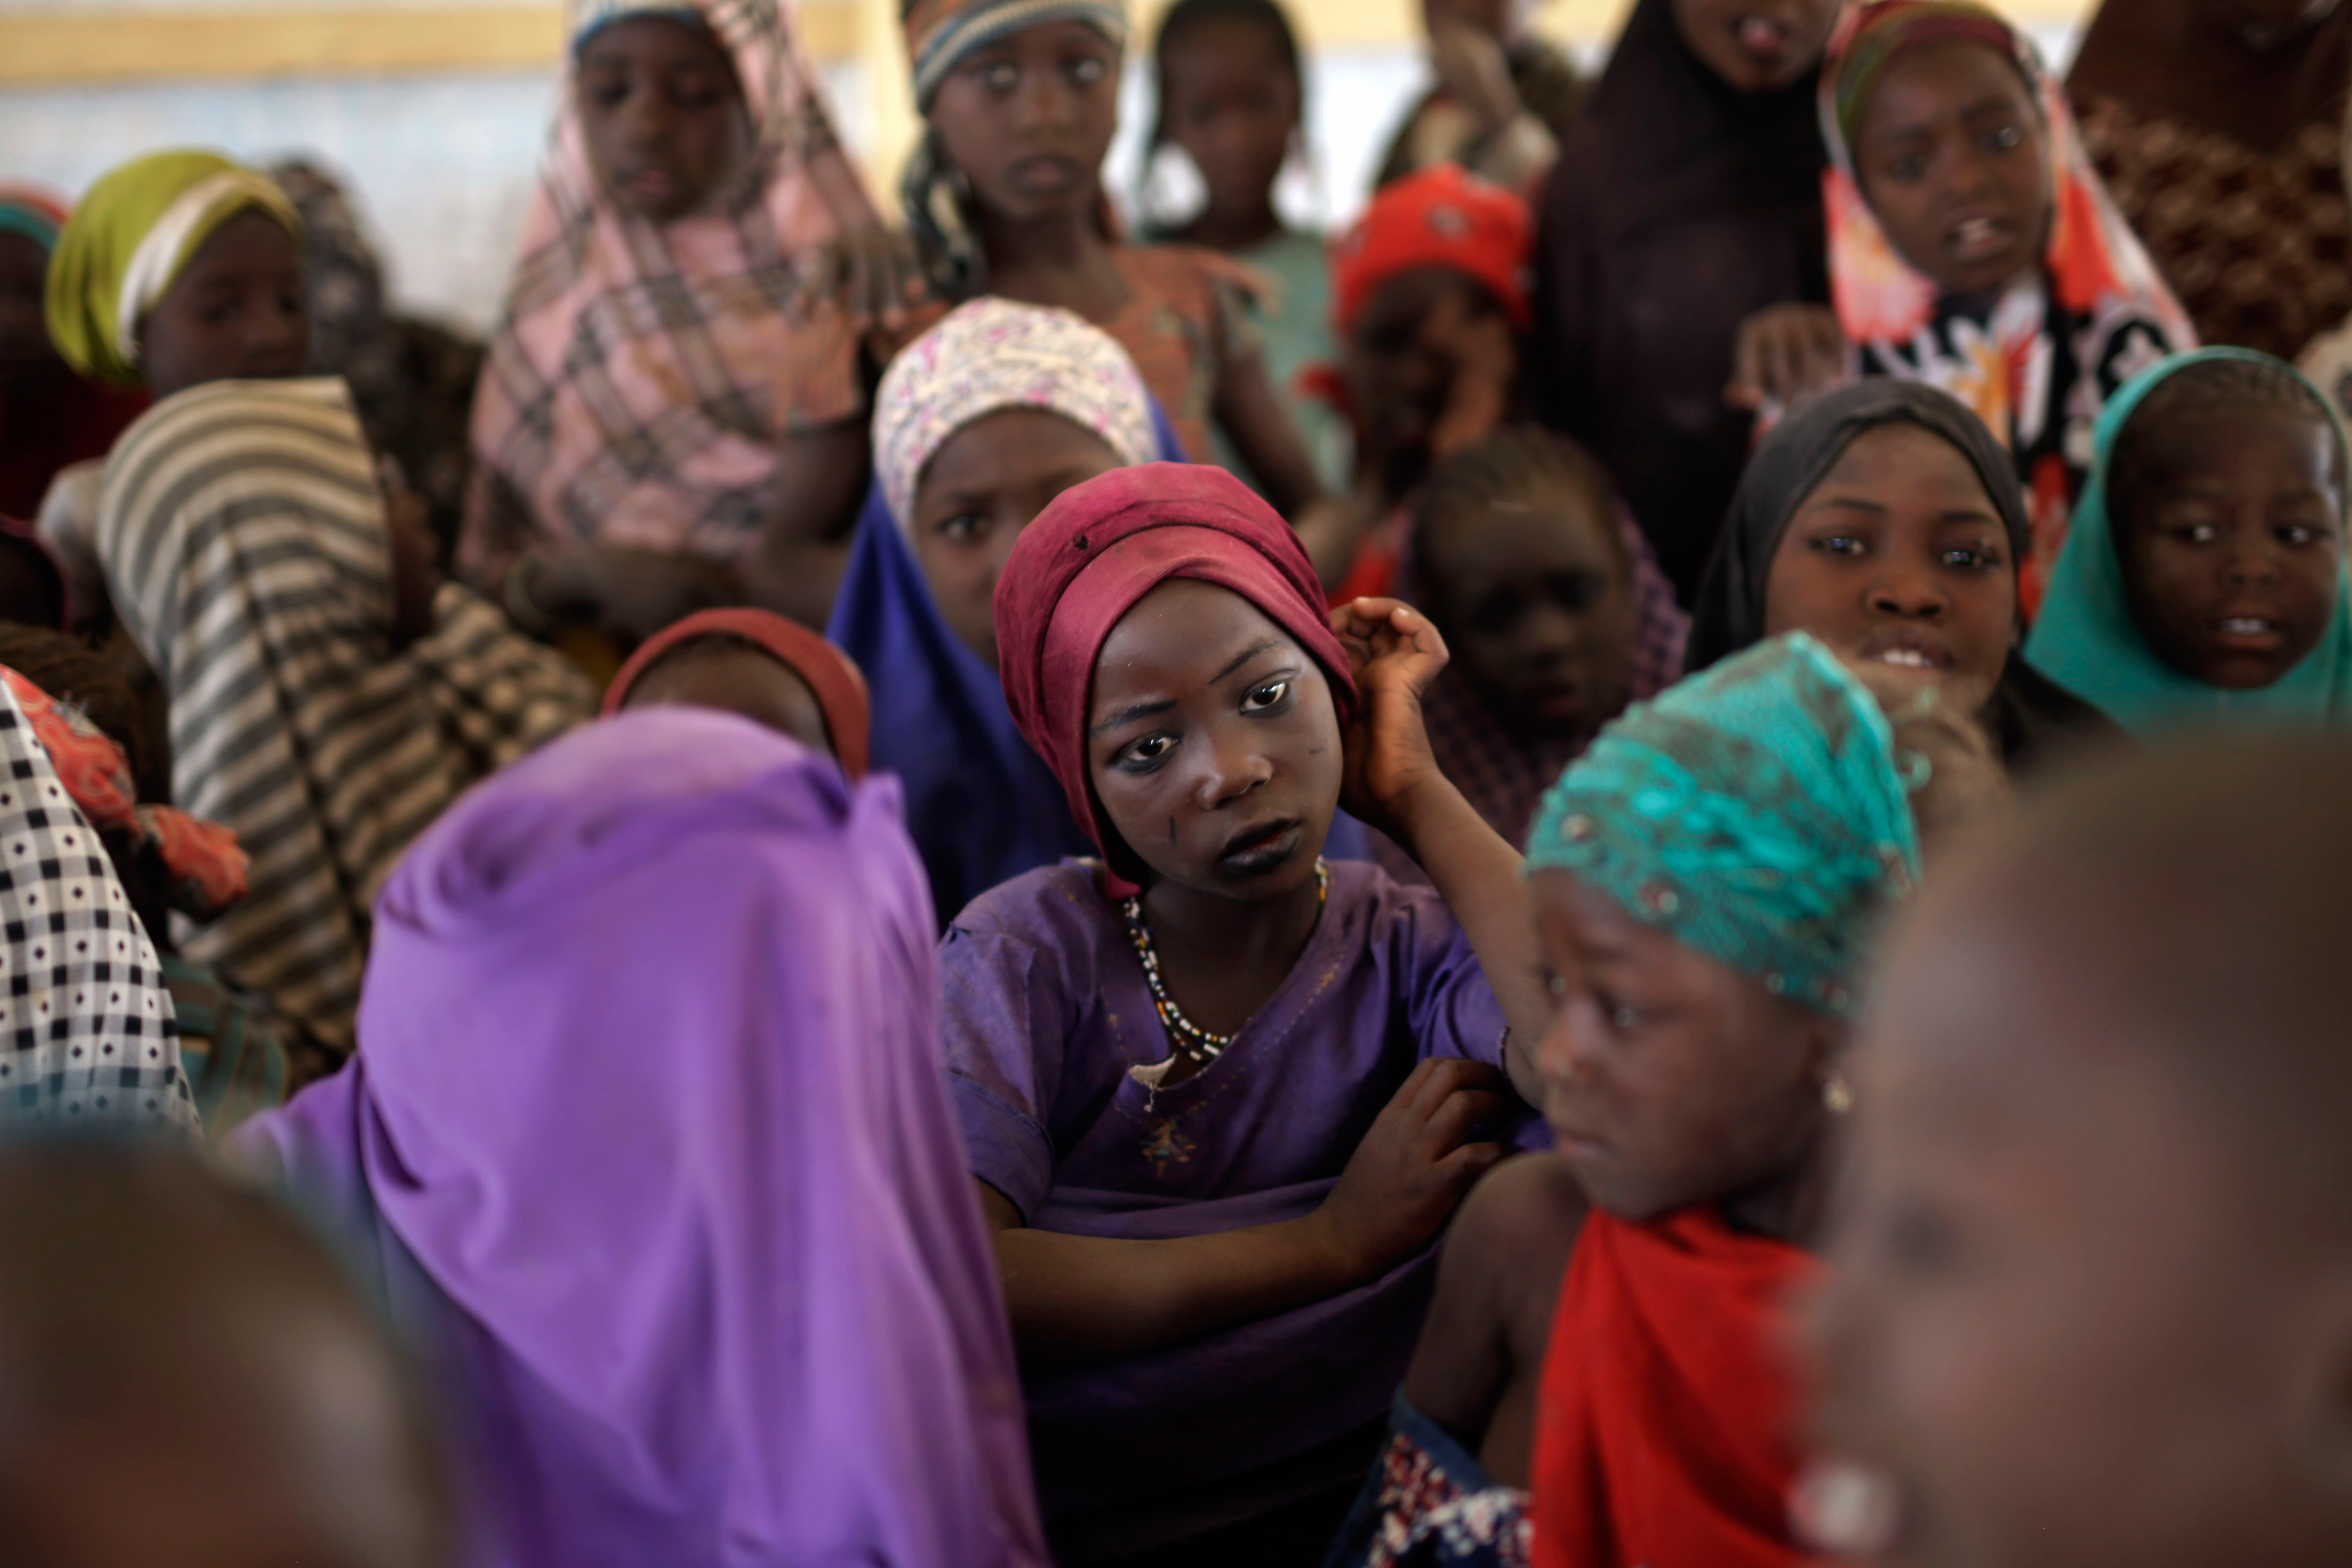 Nigerian girls who fled Boko Haram to Chad gather in a school set up by UNICEF at the Baga Solo refugee camp in Chad on March 4, 2015. (Jerome Delay—AP)